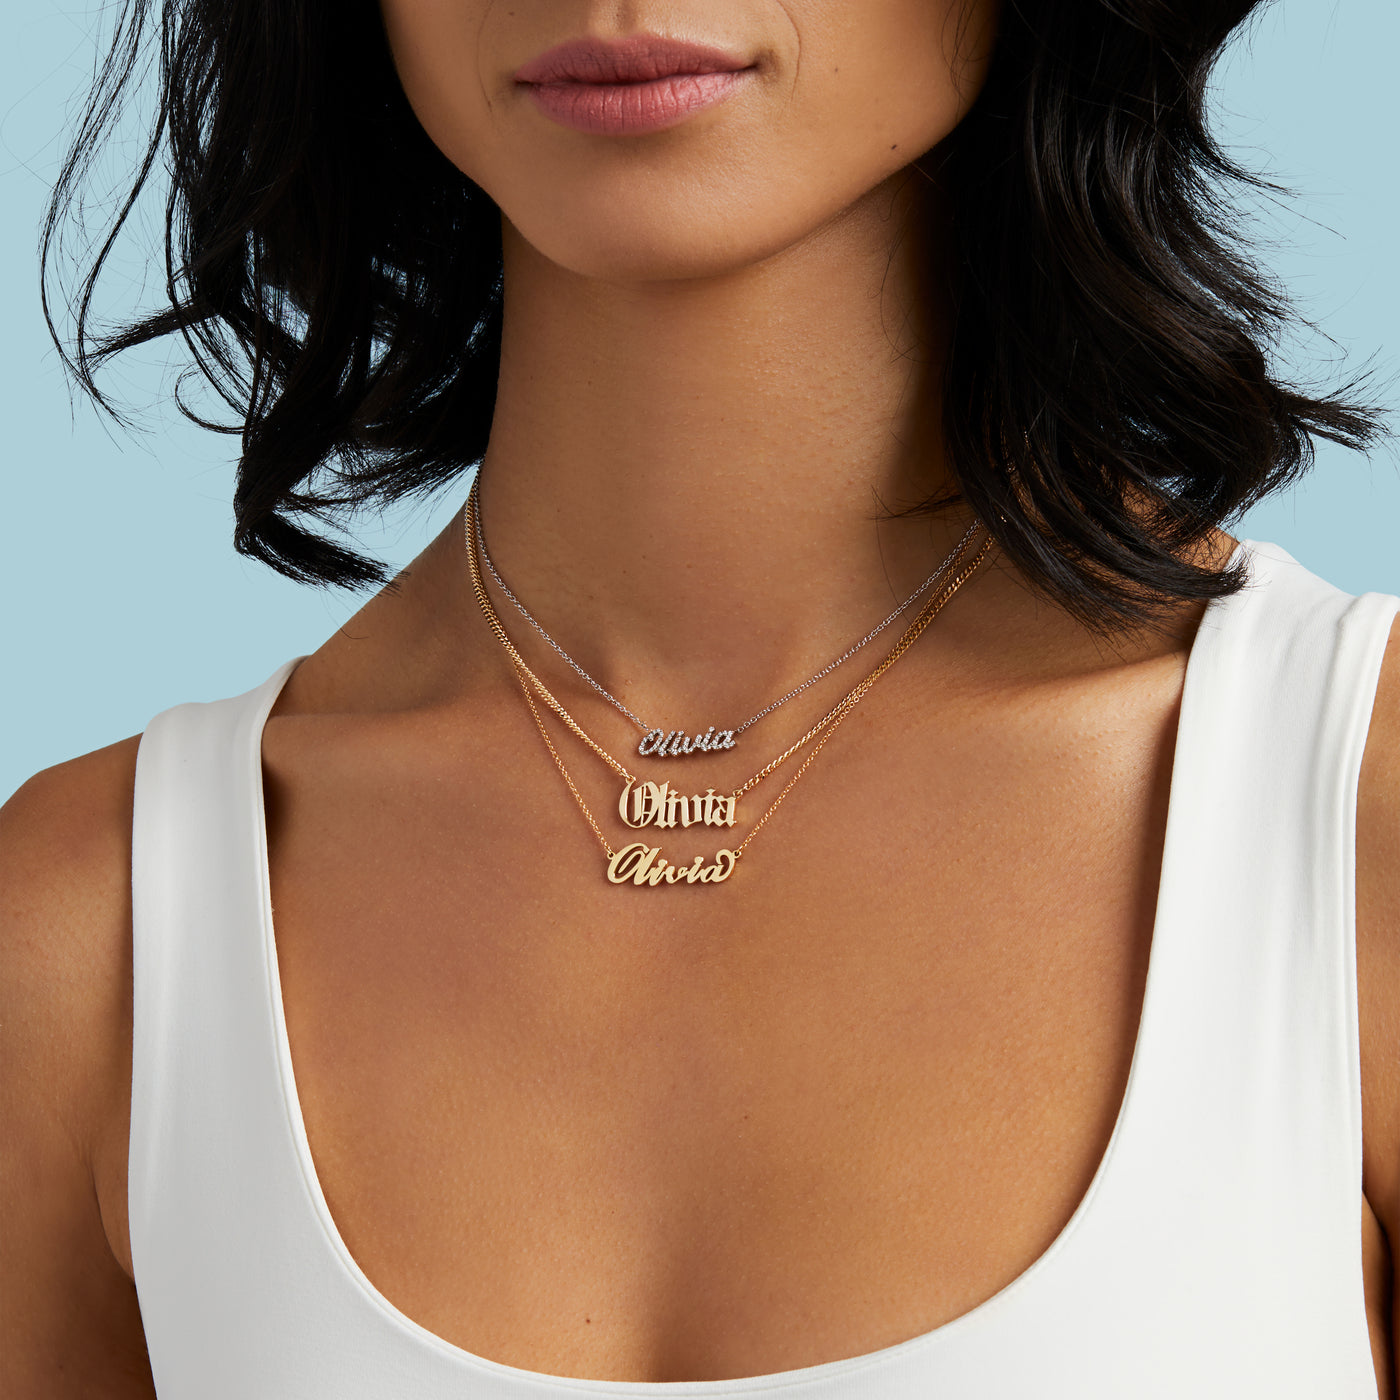 14K Gold and Diamonds Name Necklace - Monograms NYC